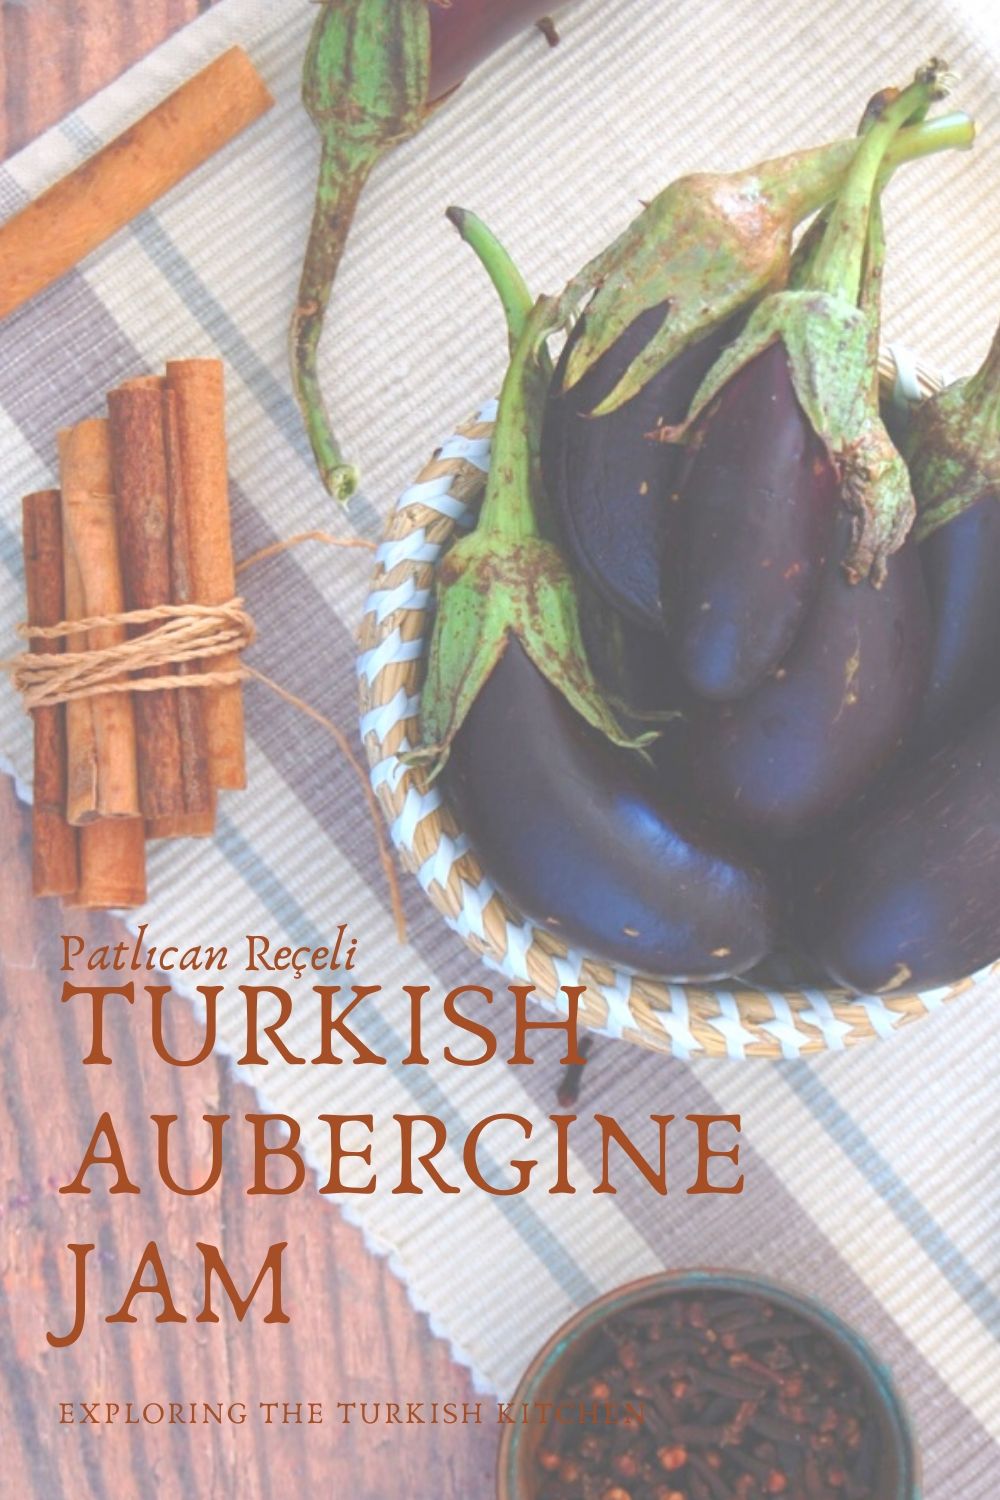 Pinable image showing baby aubergines in a basket with cinnamon and cloves aside. Text overlay: Patlıcan reçeli. Turjish Aubegine jam. Exploring The Turkish Kitchen